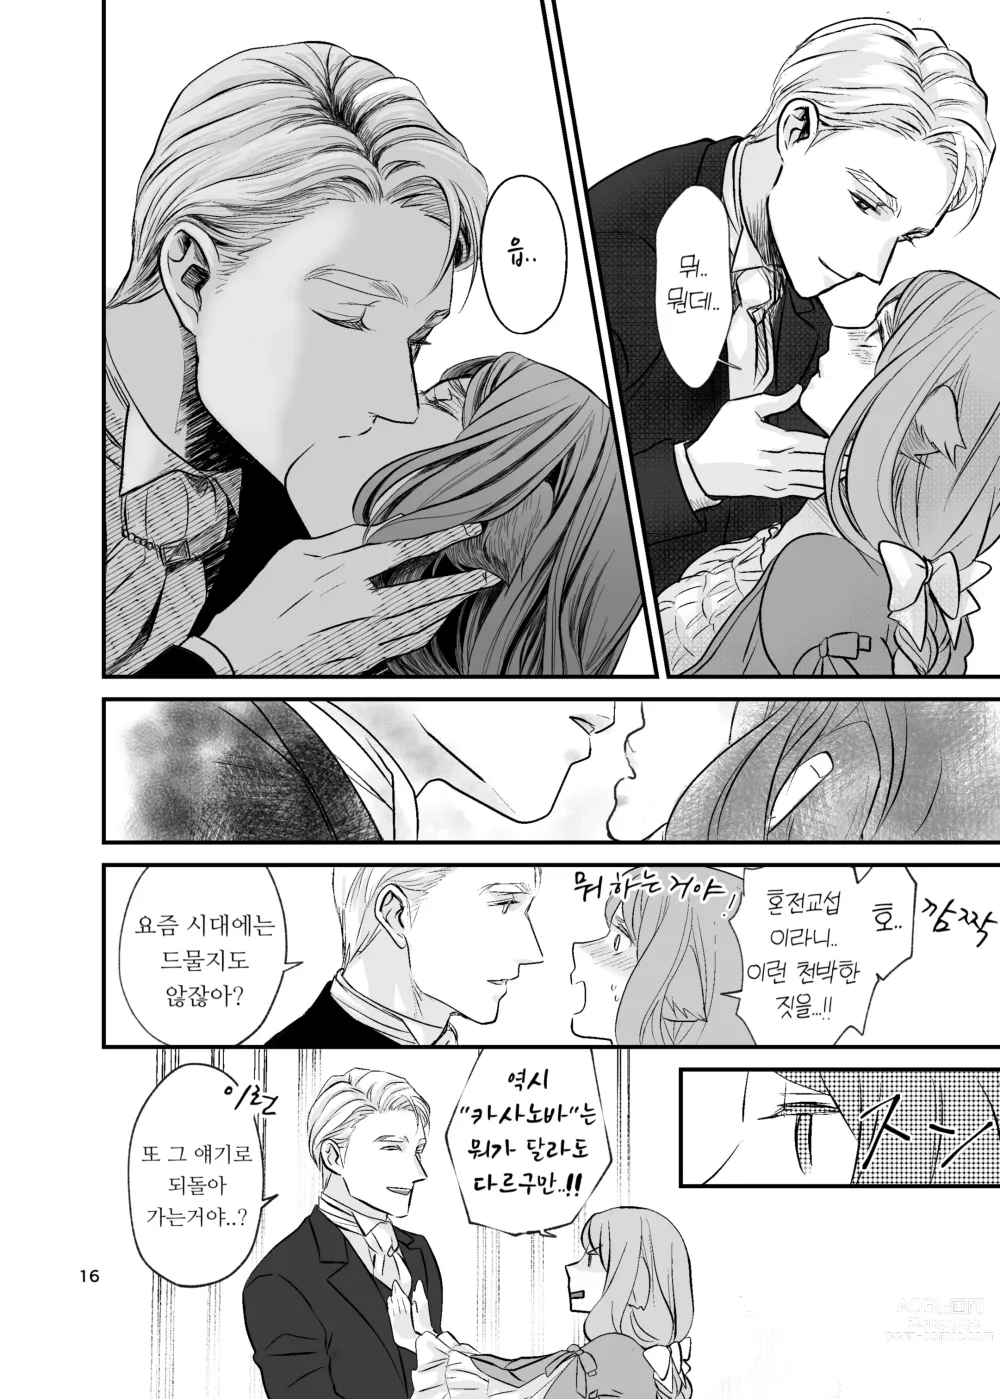 Page 16 of doujinshi 수인 영애와 혼약자